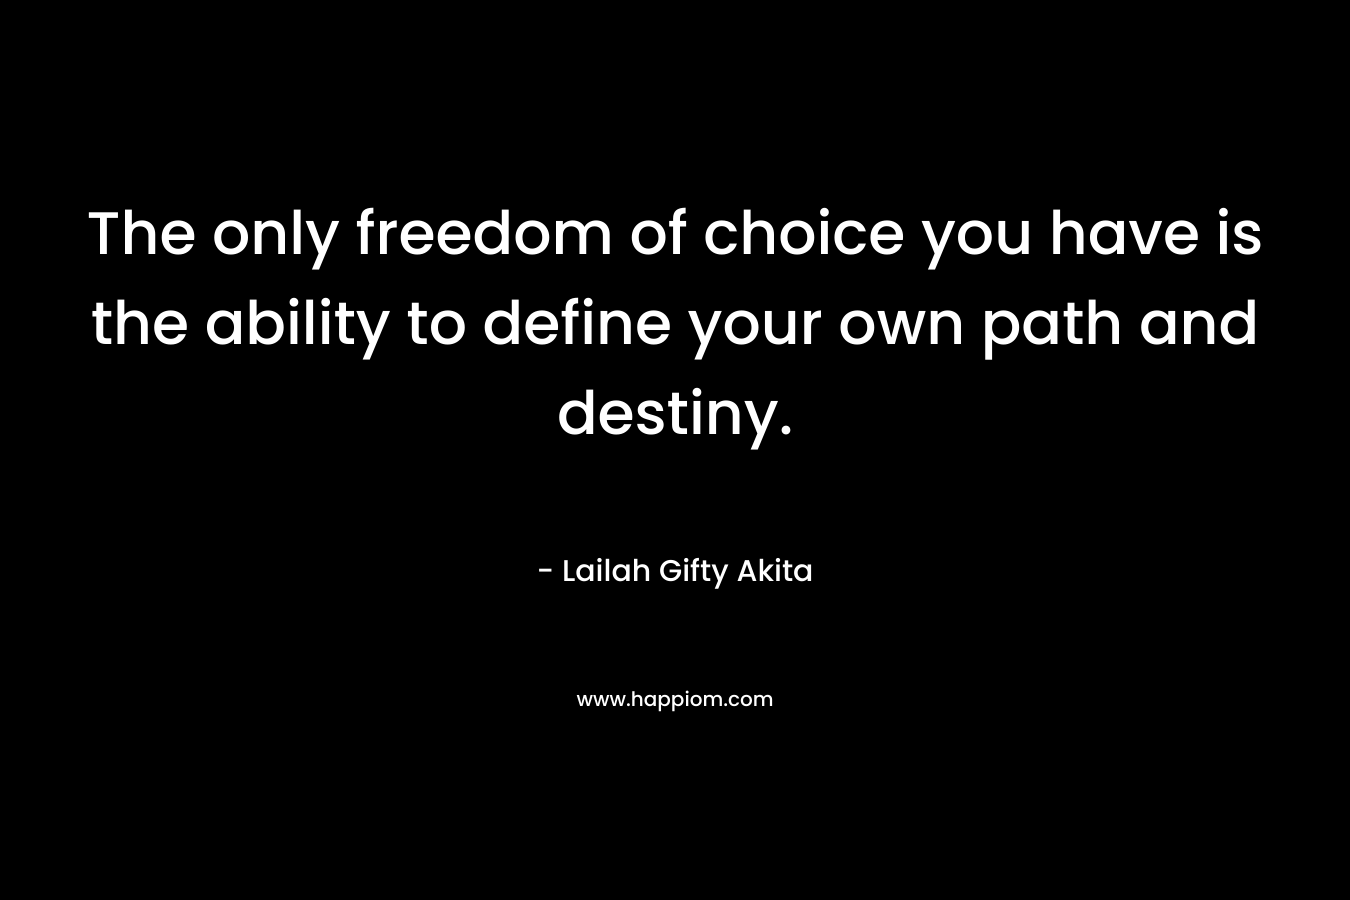 The only freedom of choice you have is the ability to define your own path and destiny.